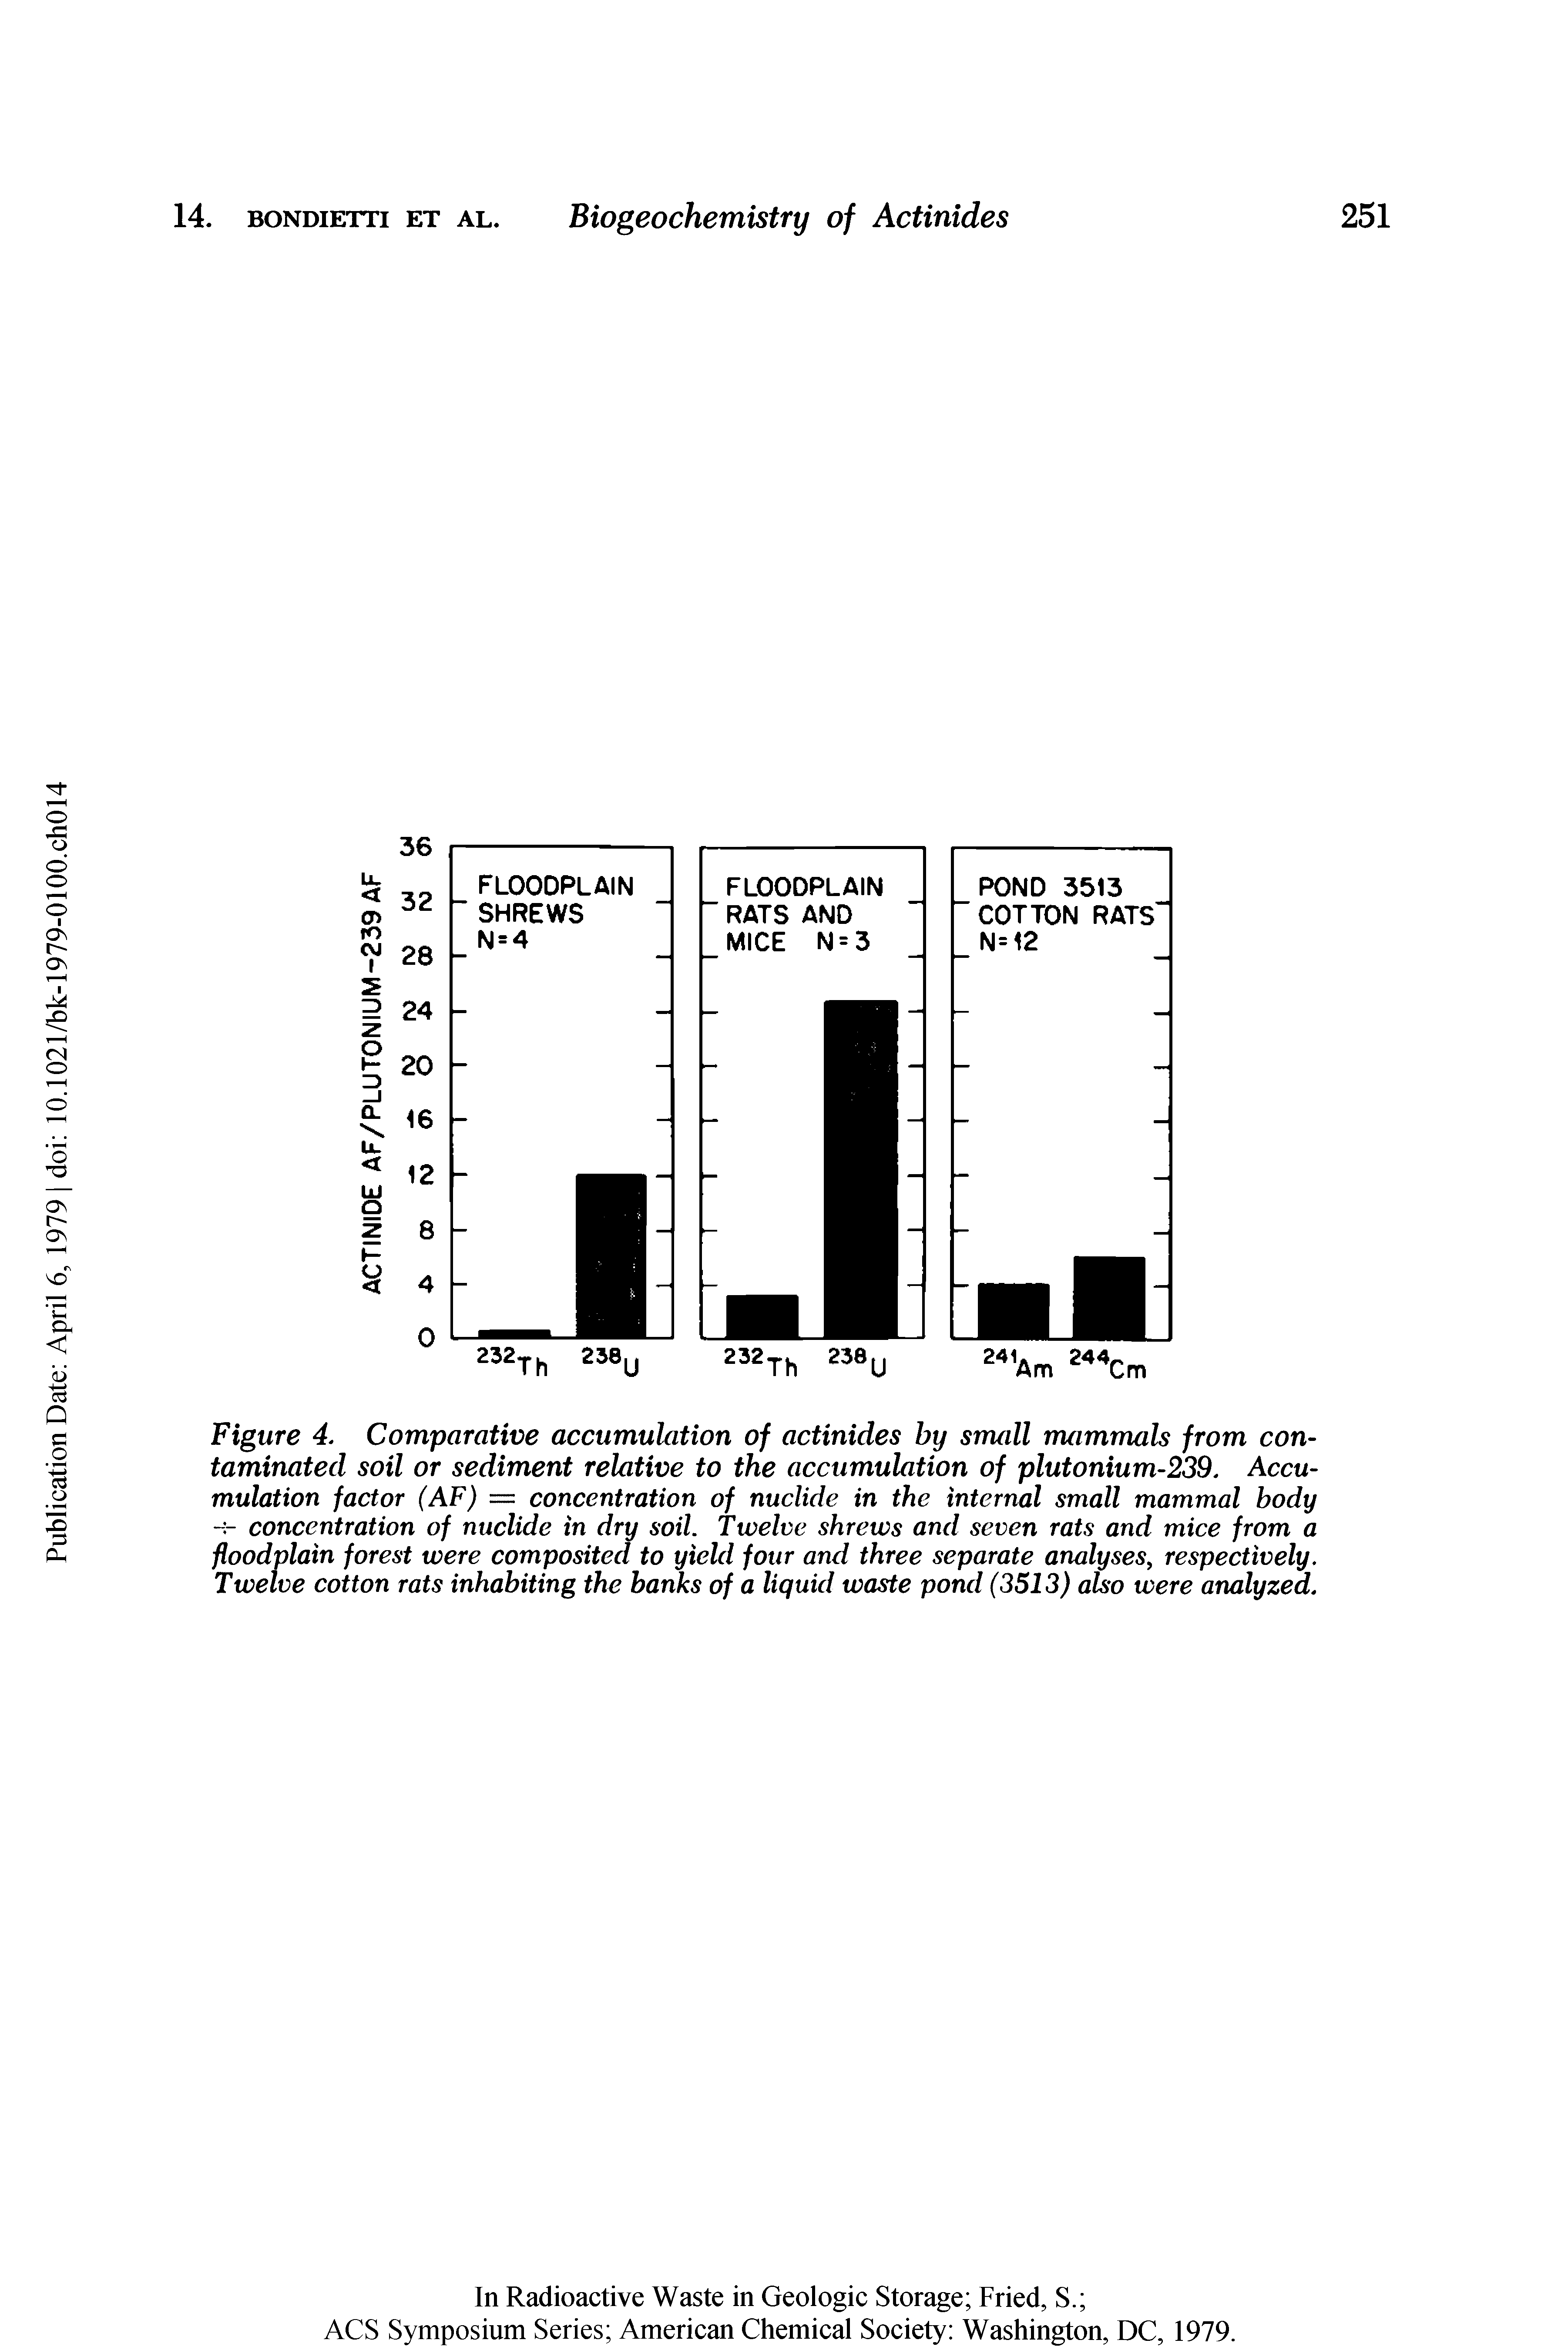 Figure 4. Comparative accumulation of actinides by small mammals from contaminated soil or sediment relative to the accumulation of plutonium-239. Accumulation factor (AF) = concentration of nuclide in the internal small mammal body -- concentration of nuclide in dry soil. Twelve shrews and seven rats and mice from a floodplain forest were composited to yield four and three separate analyses, respectively. Twelve cotton rats inhabiting the banks of a liquid waste pond (3513) also were analyzed.